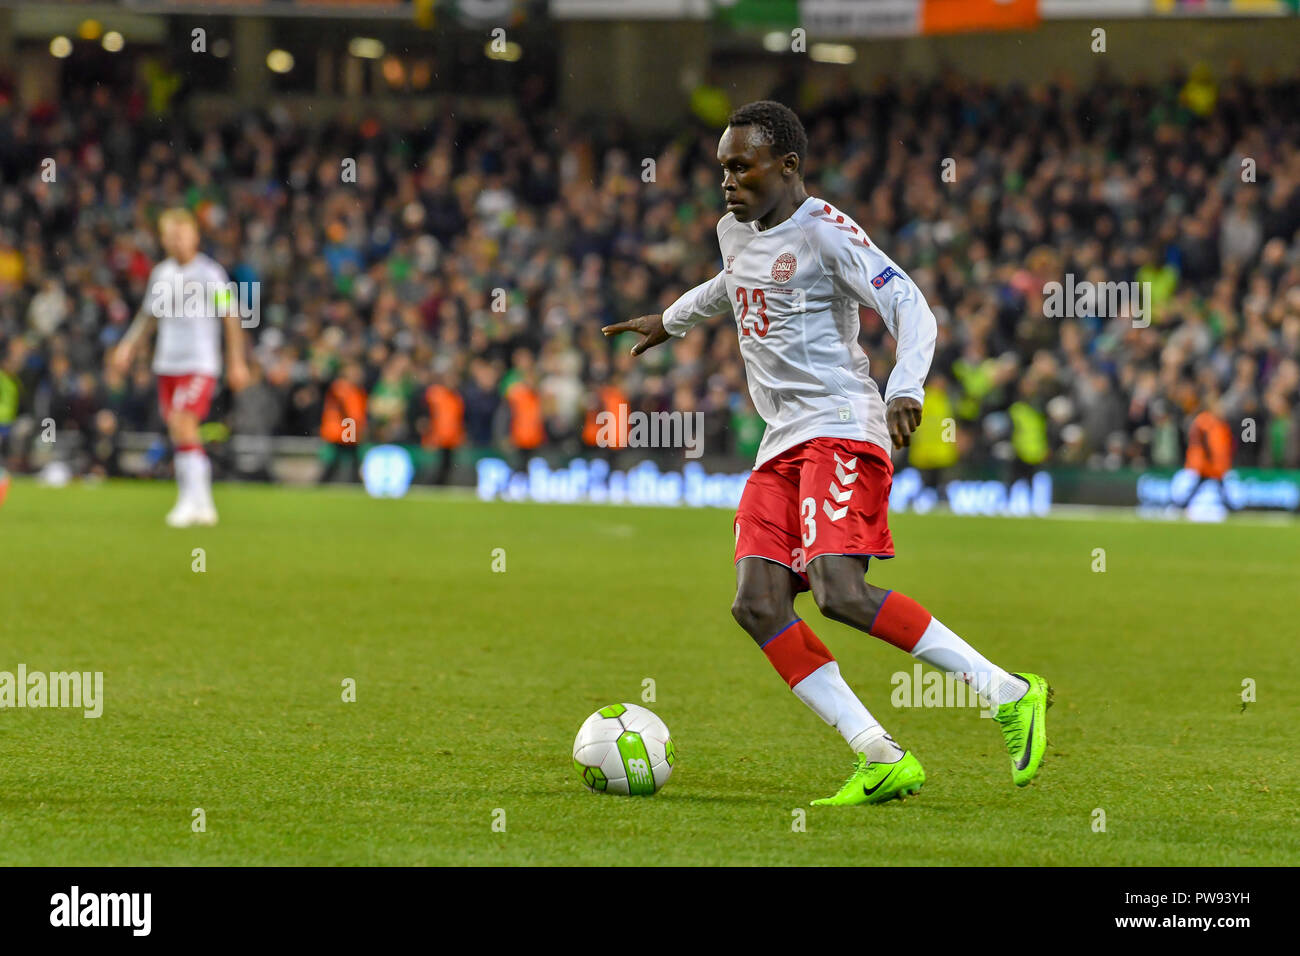 Dublin, Ireland. 13th Oct, 2018. Pione Sisto in action during the Rep of Ireland vs Denmark UEFA Nations League match at the Aviva Stadium. Score 0-0 Credit: Ben Ryan/SOPA Images/ZUMA Wire/Alamy Live News Stock Photo